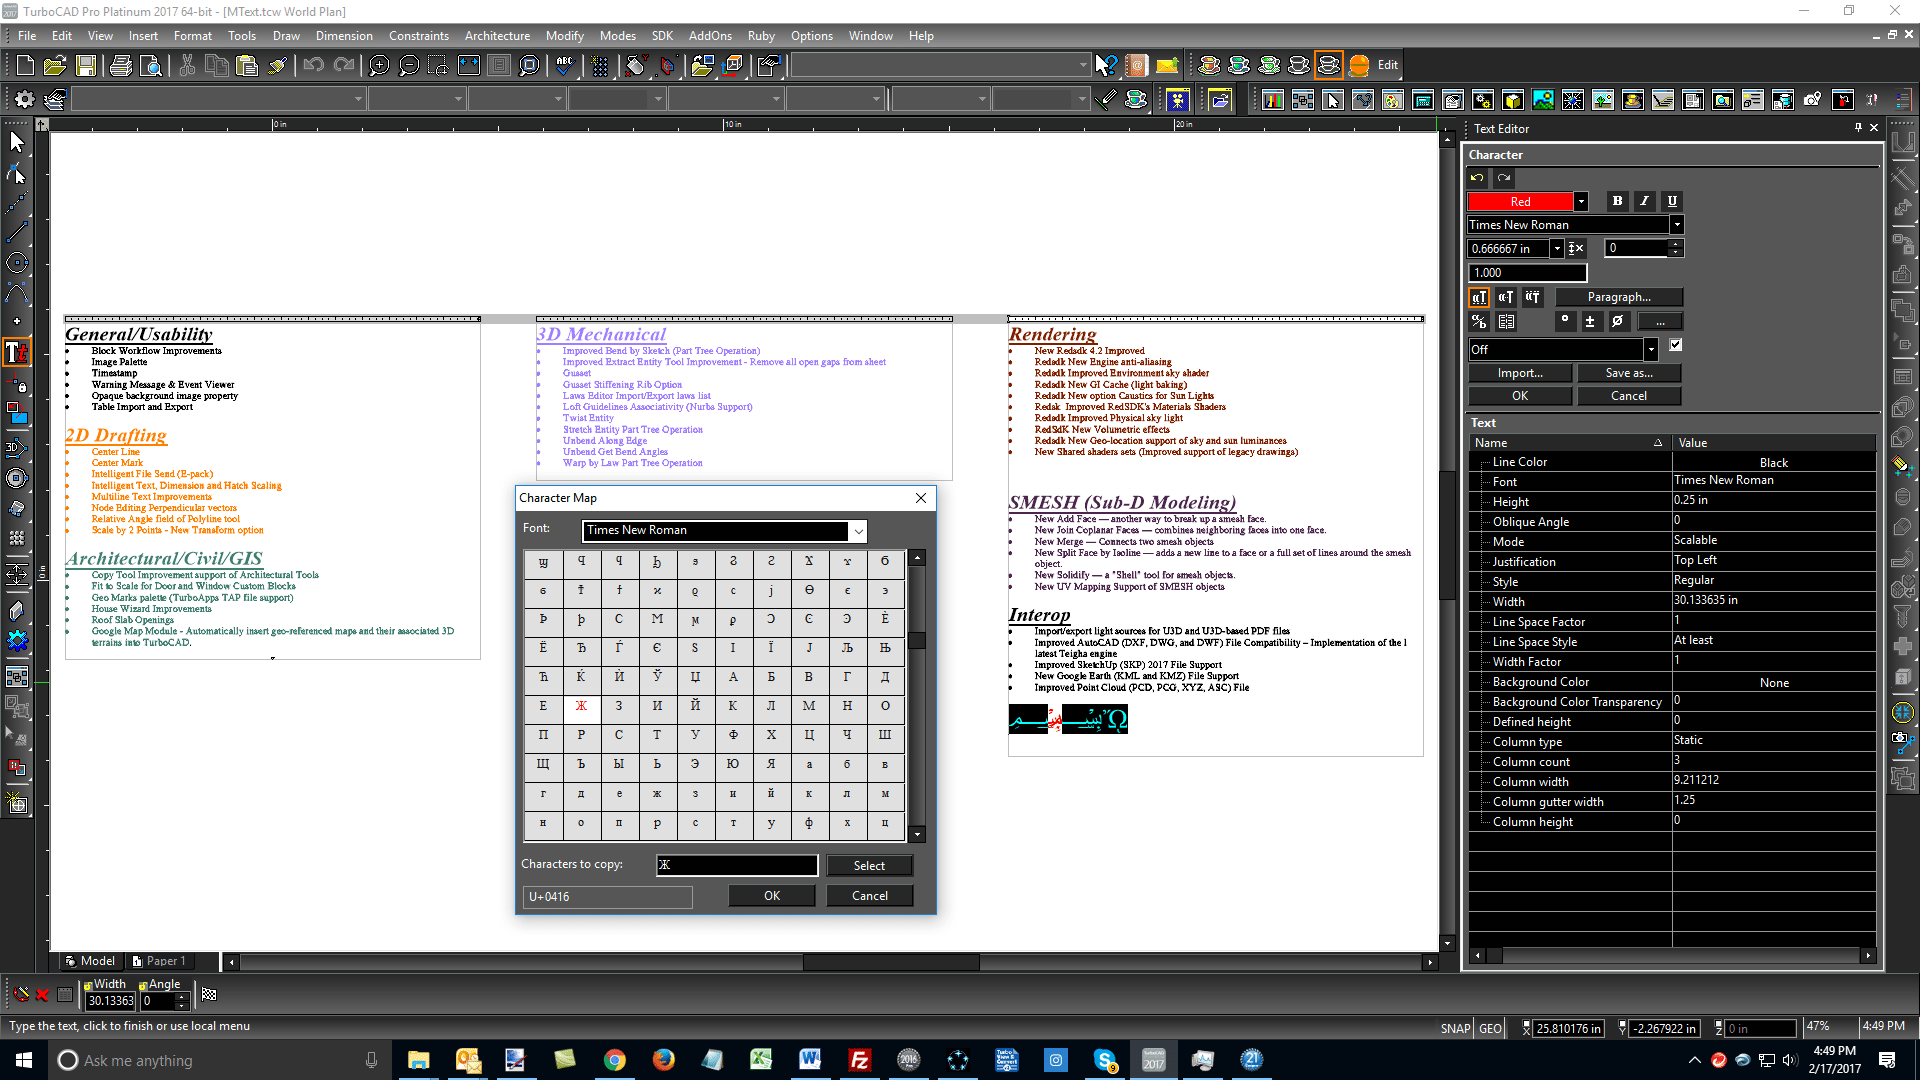 Software for setting OS/2 PM pallette, includes ASM source code.